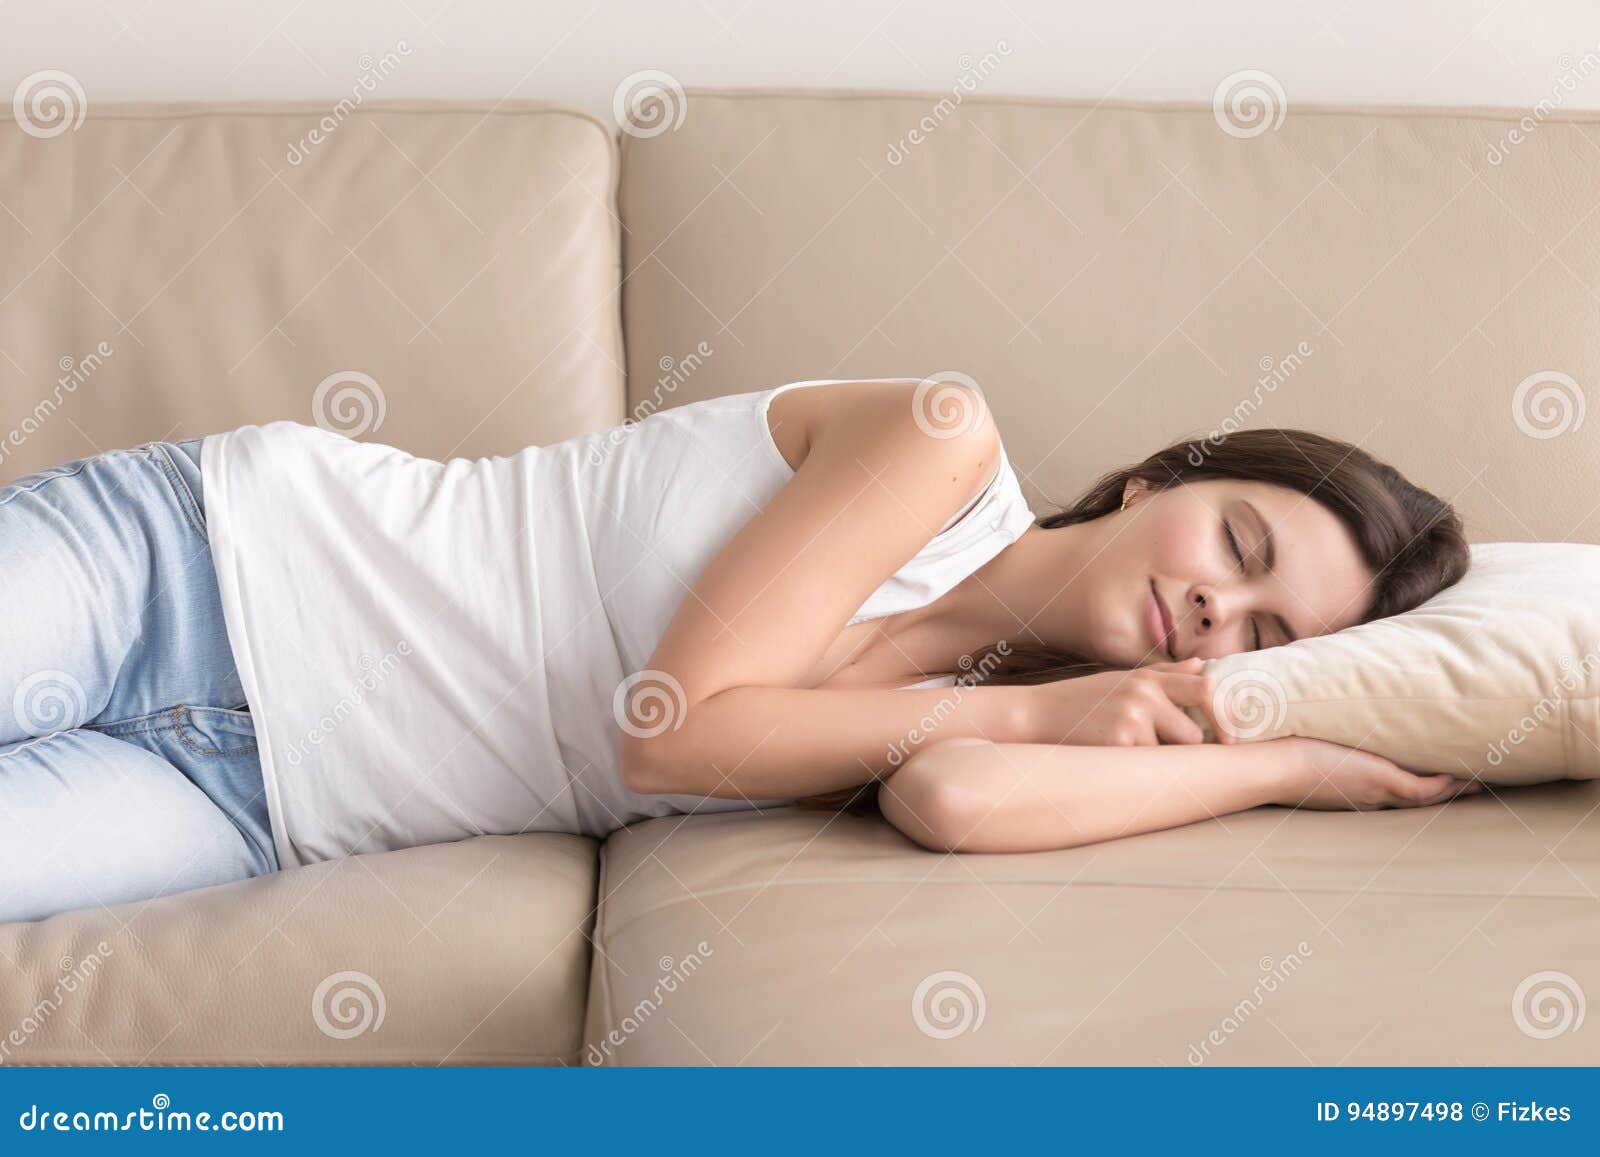 pretty woman takes short nap during day on sofa